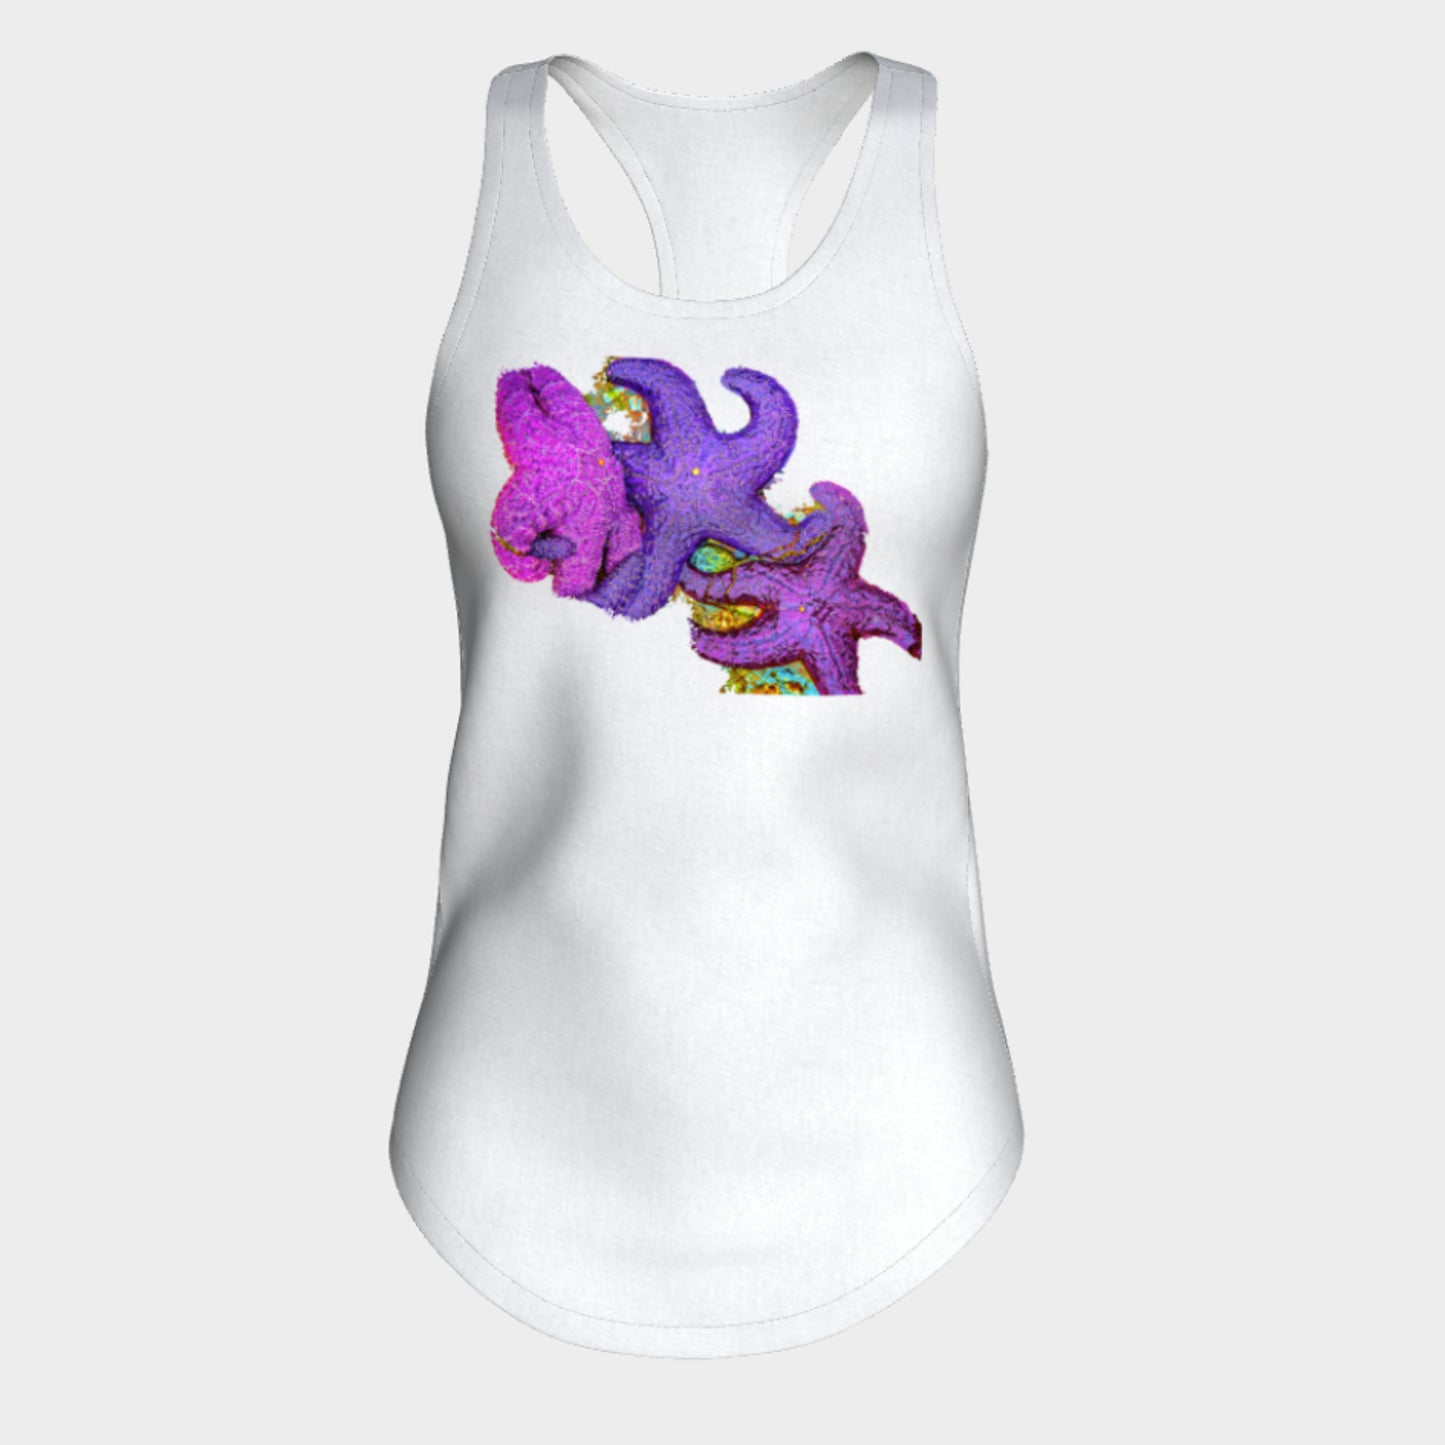 Starfish Cluster Racerback Tank Top  Excellent choice for the summer or for working out.   Made from 60% spun cotton and 40% poly for a mix of comfort and performance, you get it all (including my photography and digital art) with this custom printed racerback tank top.   Van Isle Goddess Next Level racerback tank top will quickly become you go-to tank top because of the super comfy fit!